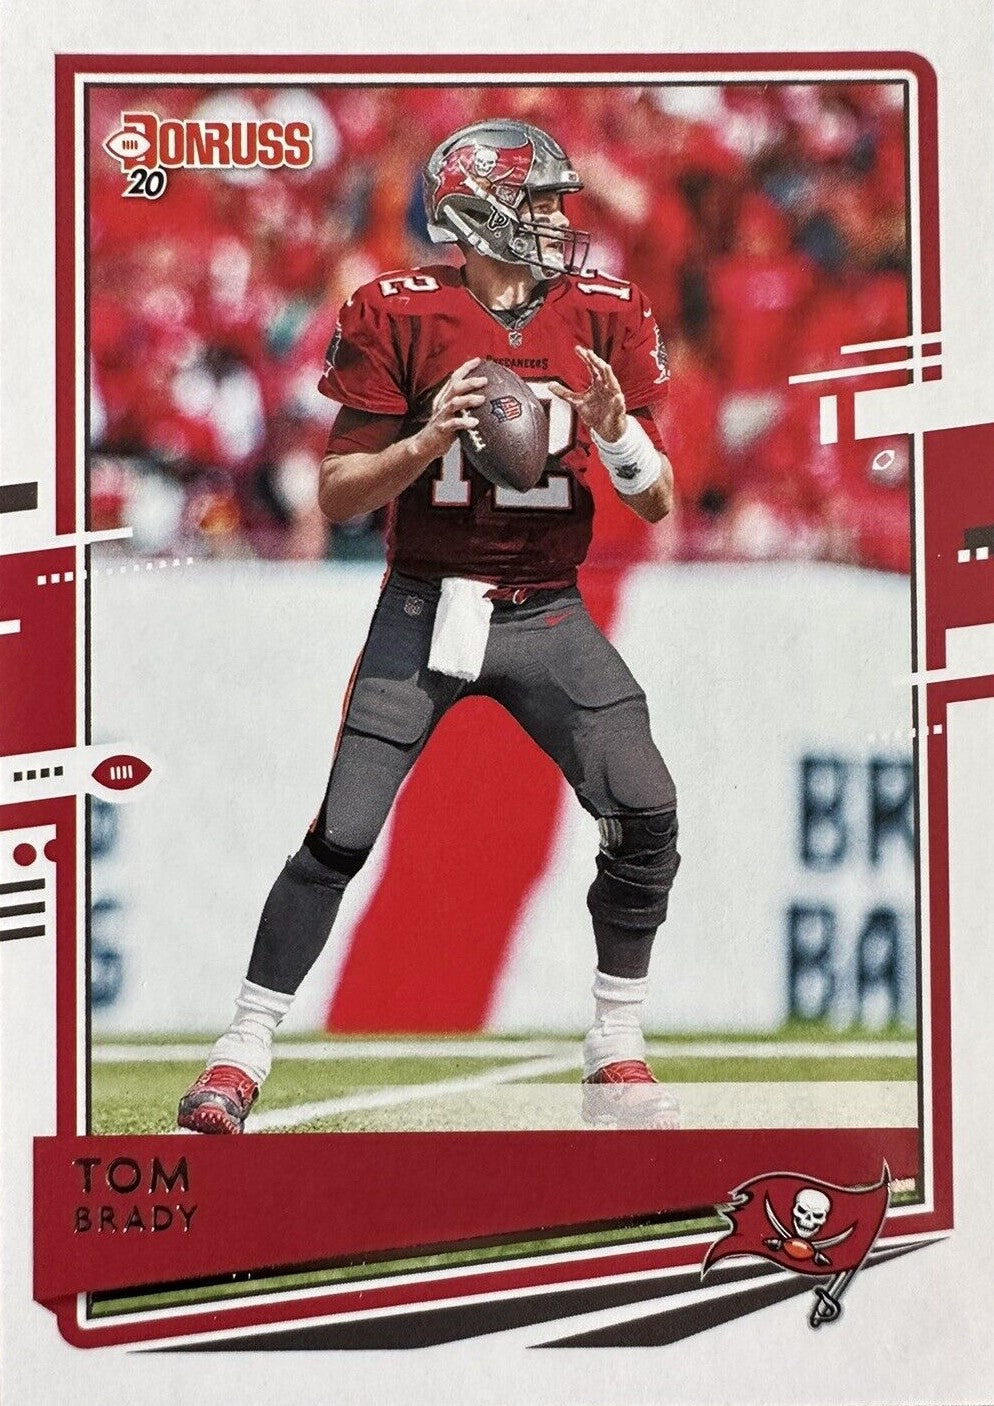 Tom Brady 2020 Panini Donruss Series Mint Card #230 picturing him in his Tampa Bay Buccaneers Jersey.